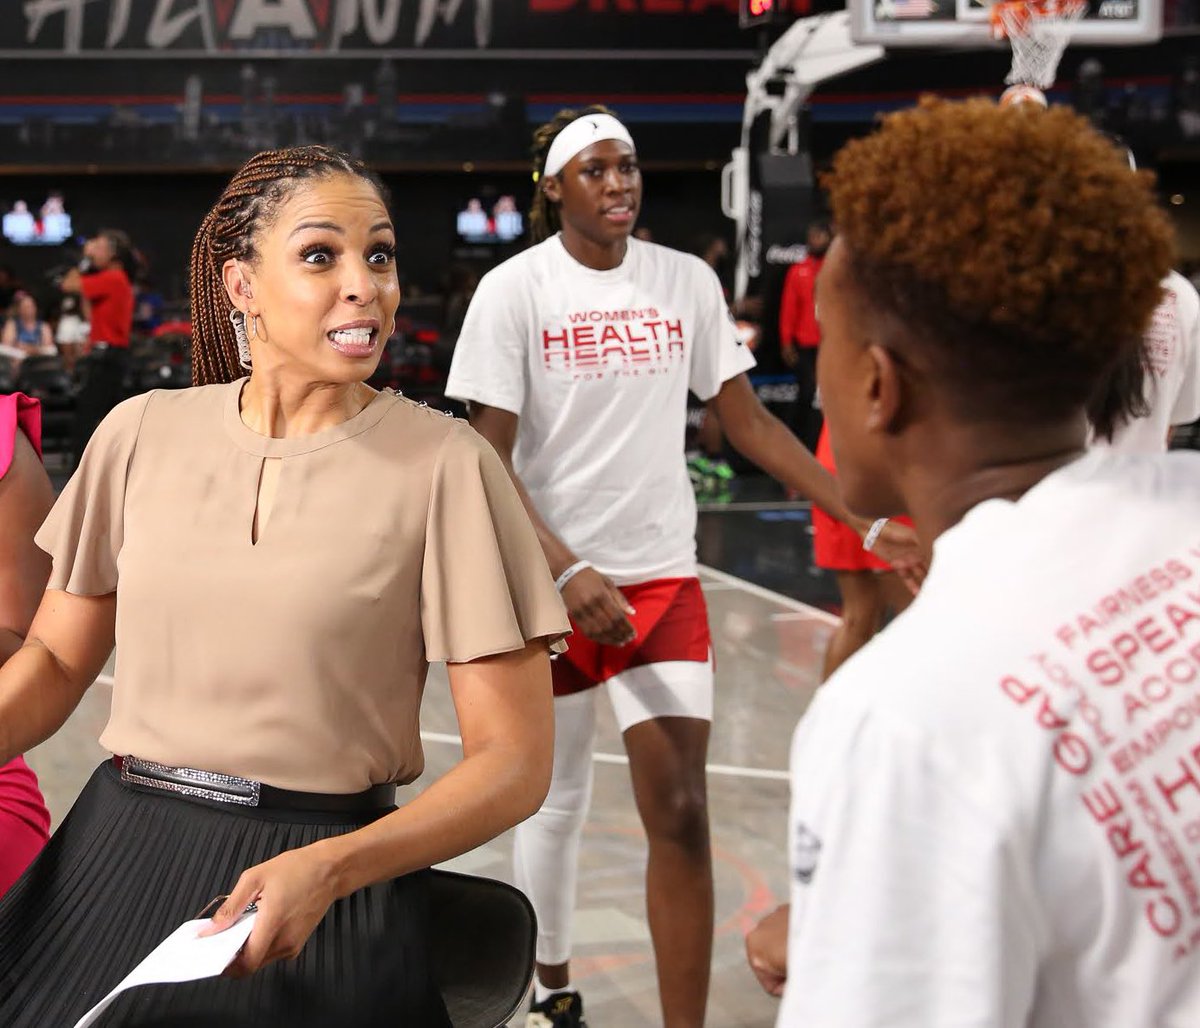 When you are getting cussed out pregame by @justDROB for saying something crazy on air🤦🏽‍♀️😭😂 D Rob wasn’t really upset lol but I have been confronted by players & coaches. I appreciate and invite the dialogue! As a basketball analyst/host/media it comes with the territory!😁